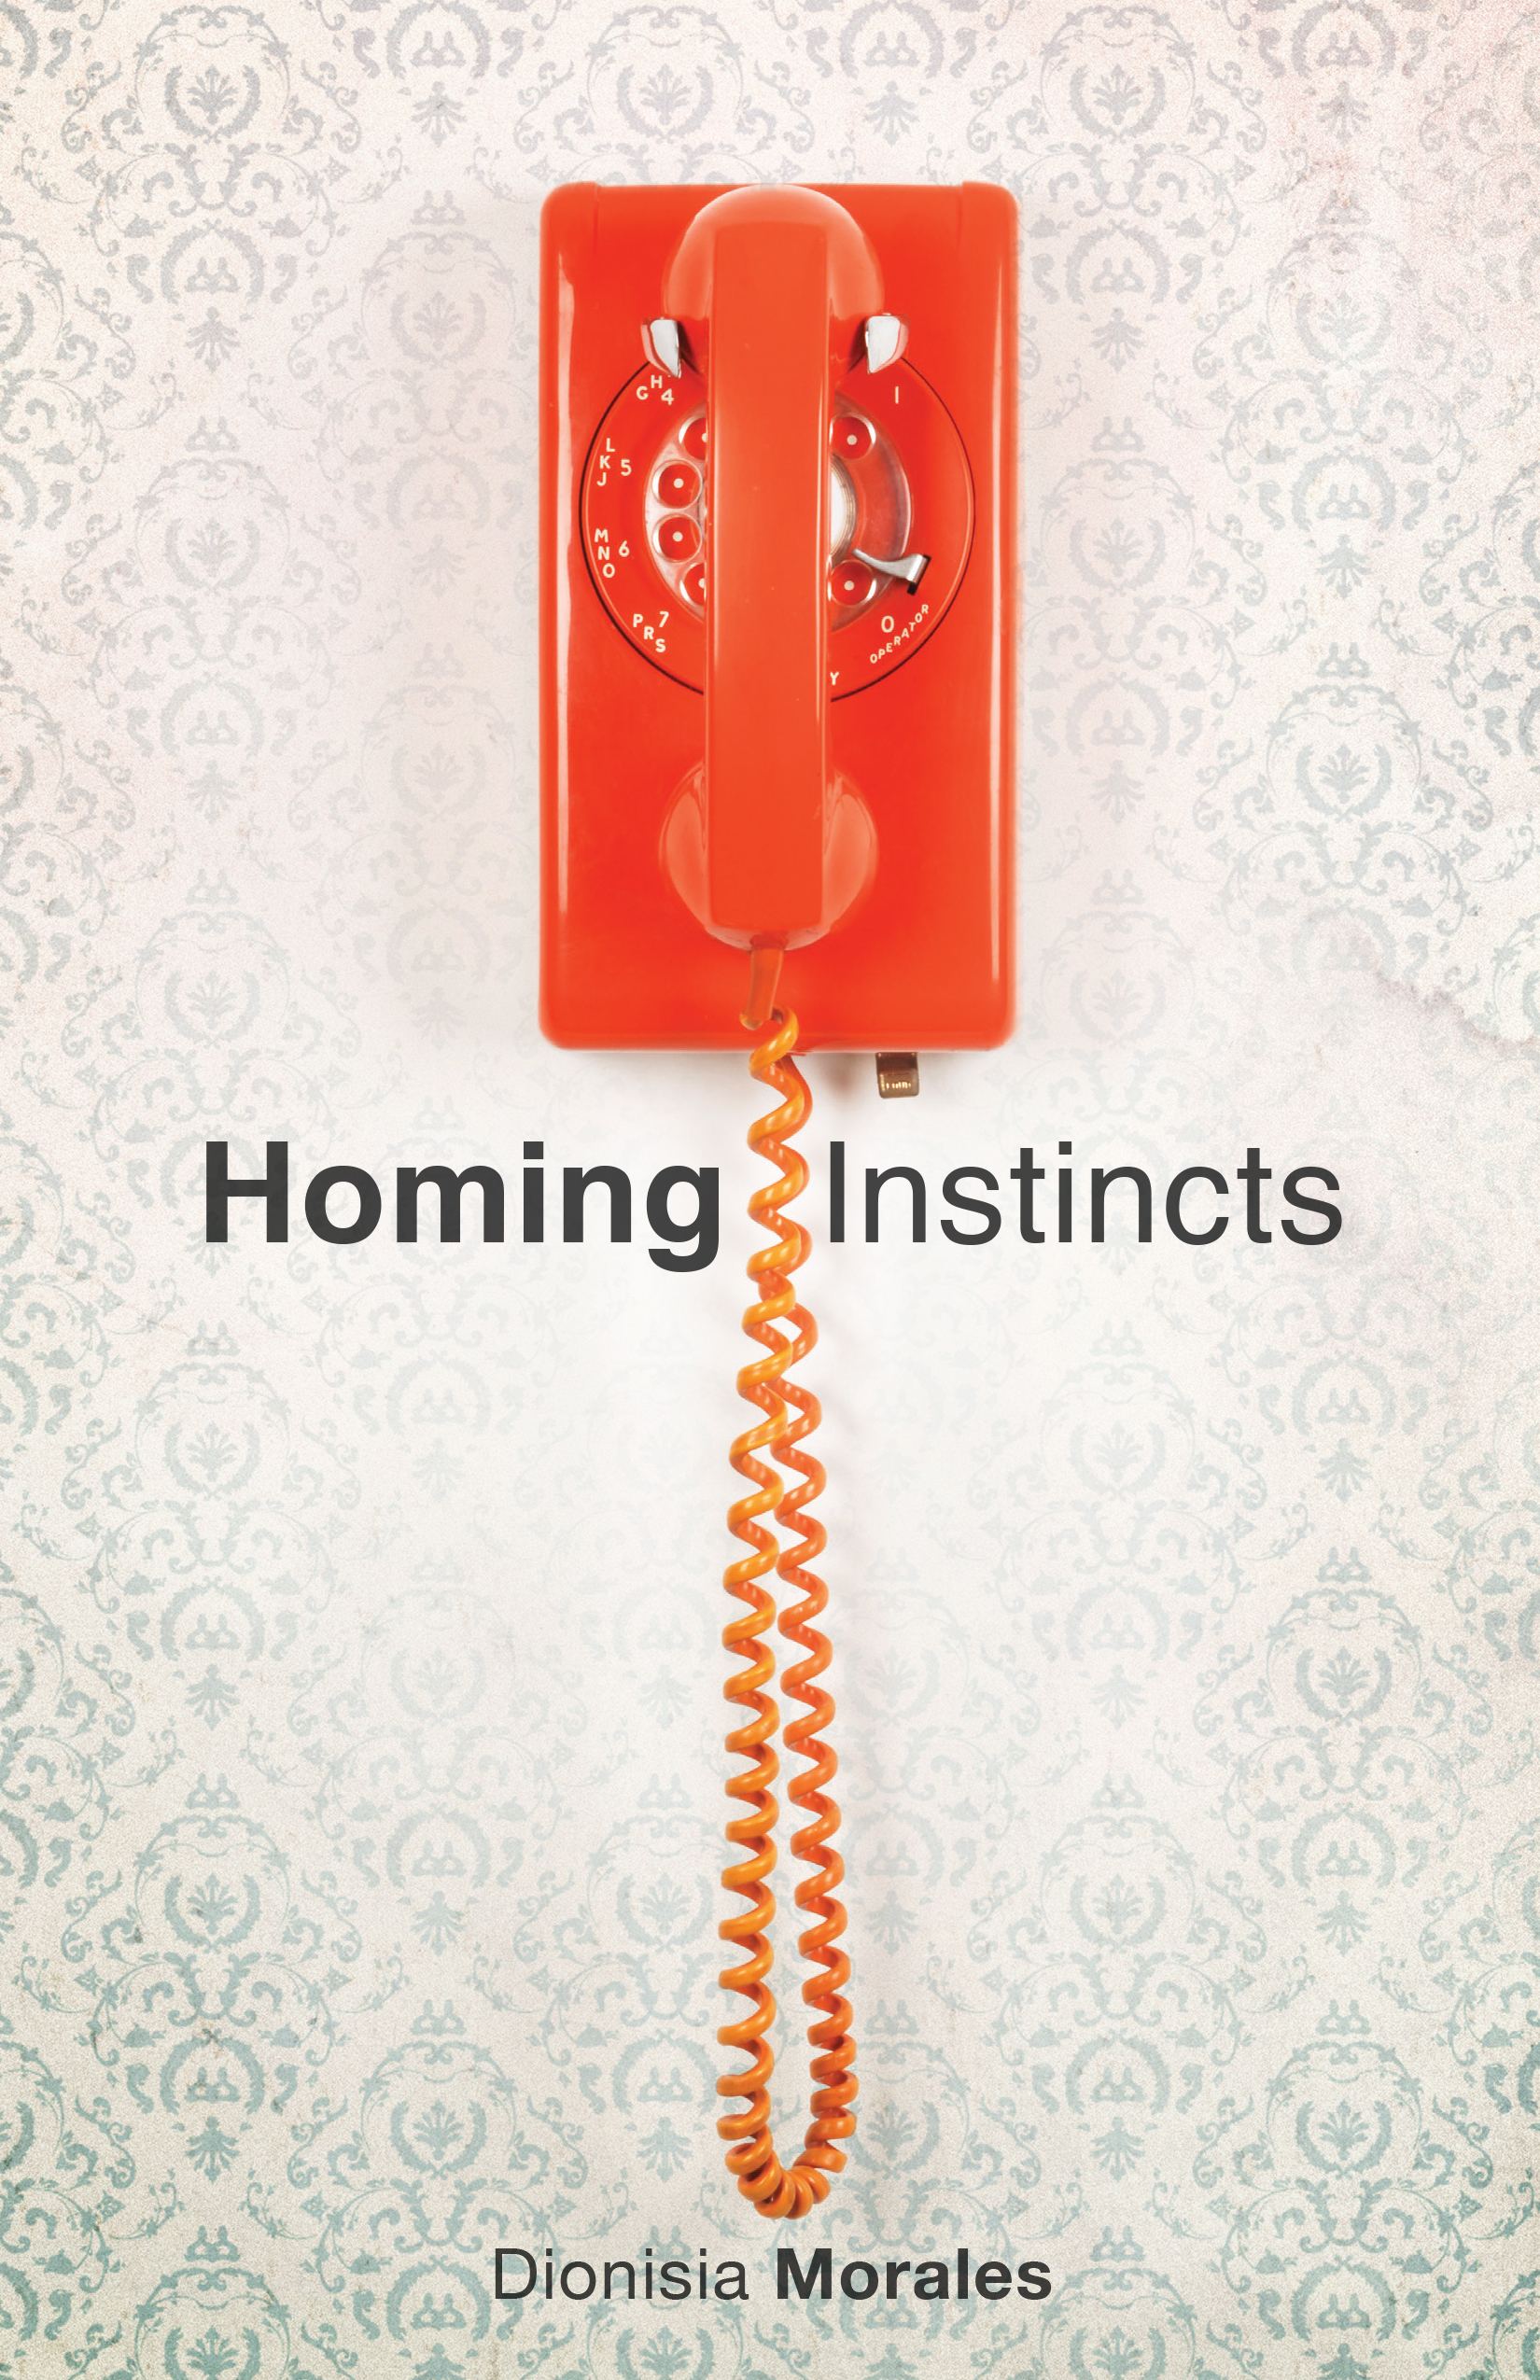 Homing Instincts by Dionisia Morales